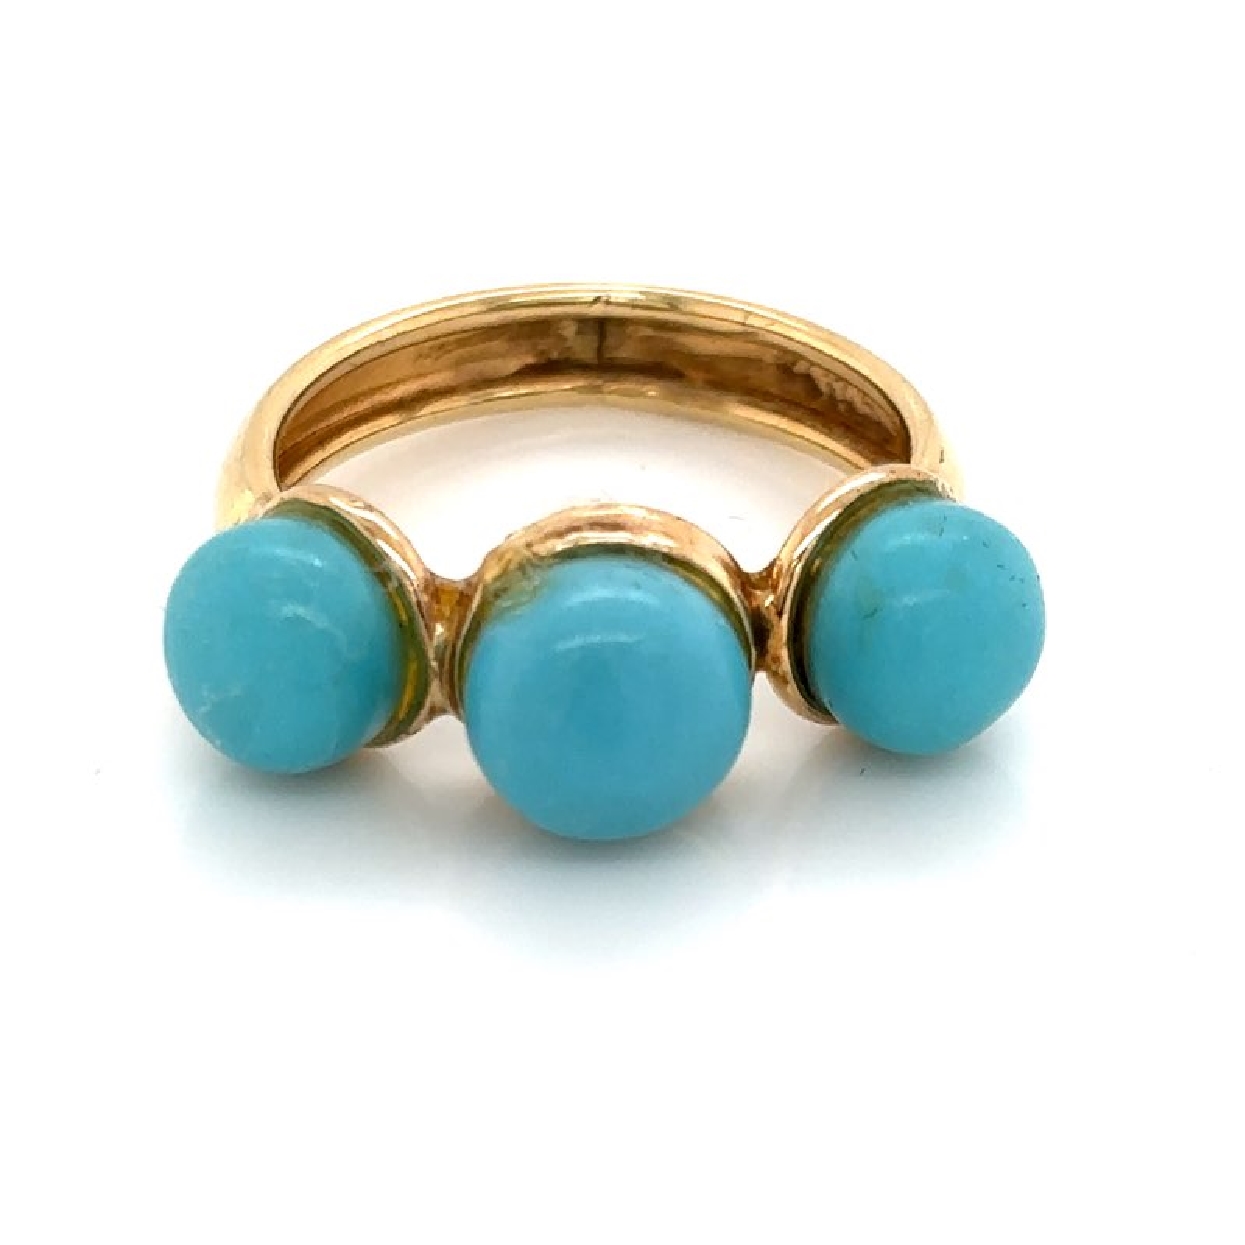 14K Yellow Gold Band with 3 Turquoise Beads Size 5